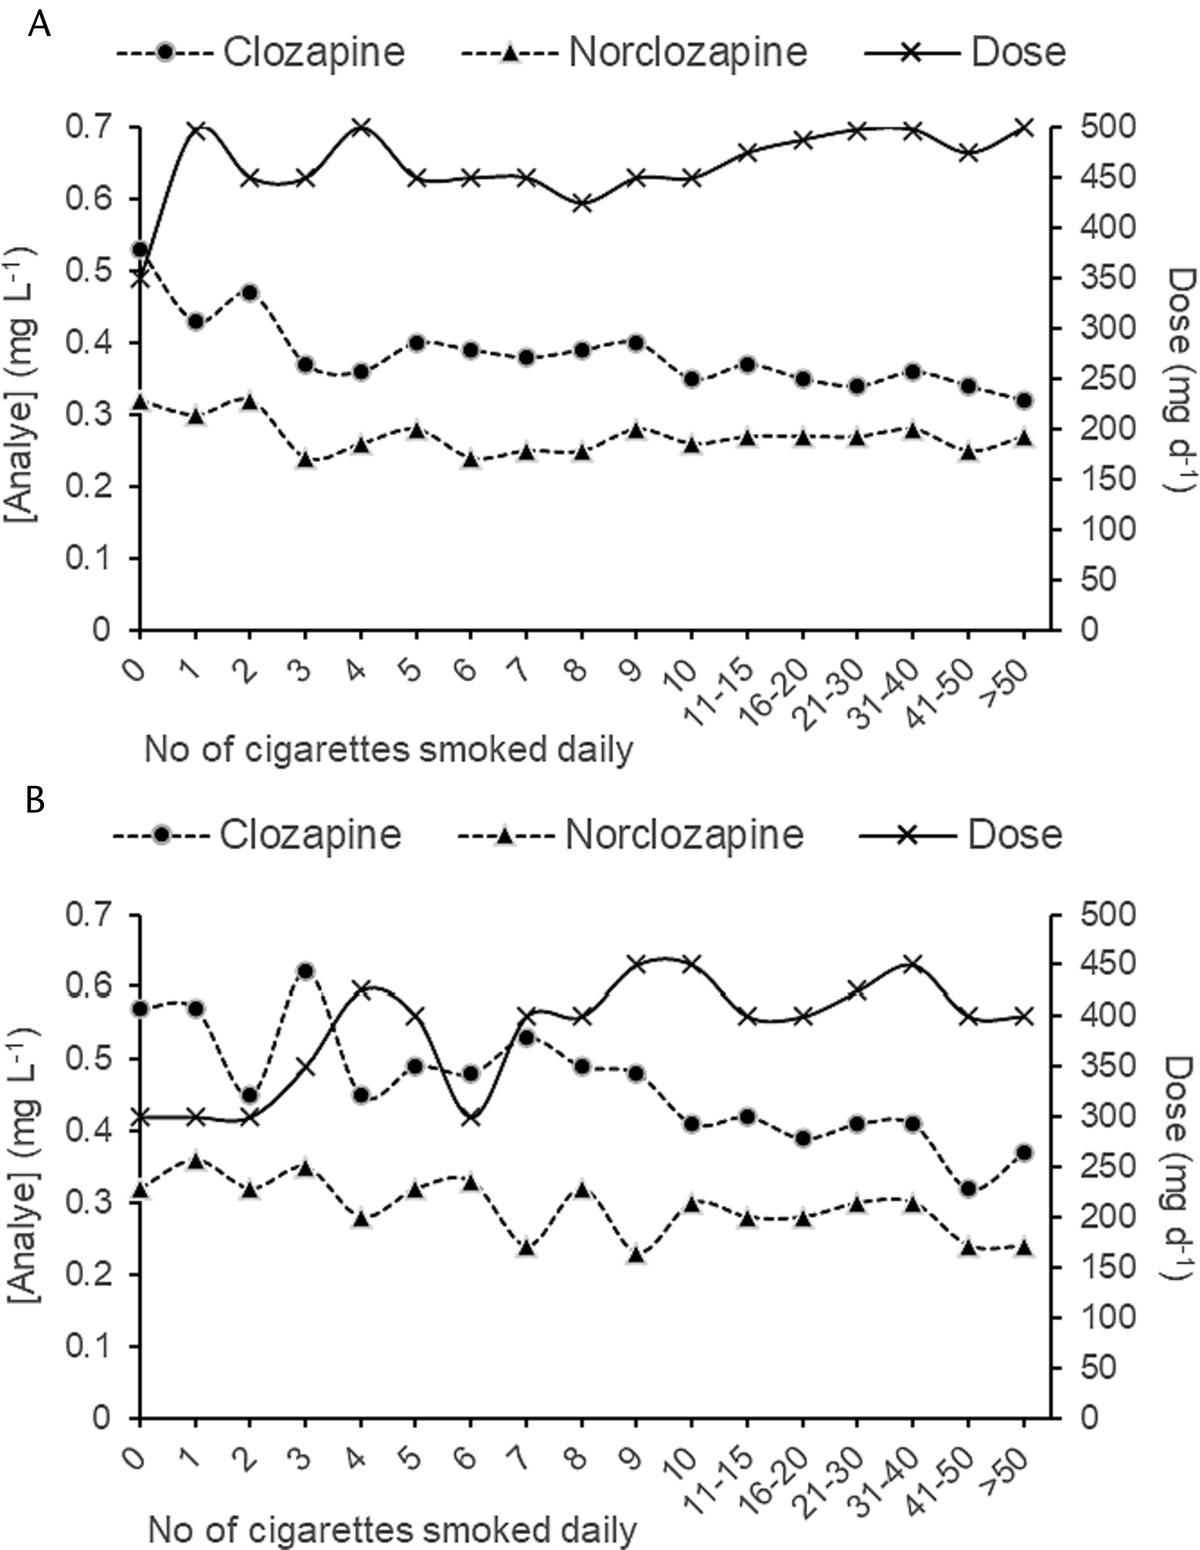 Effect of Cigarette Smoking on Clozapine Dose and on Plasma Clozapine and N-Desmethylclozapine (Norclozapine) Concentrations in Clinical Practice